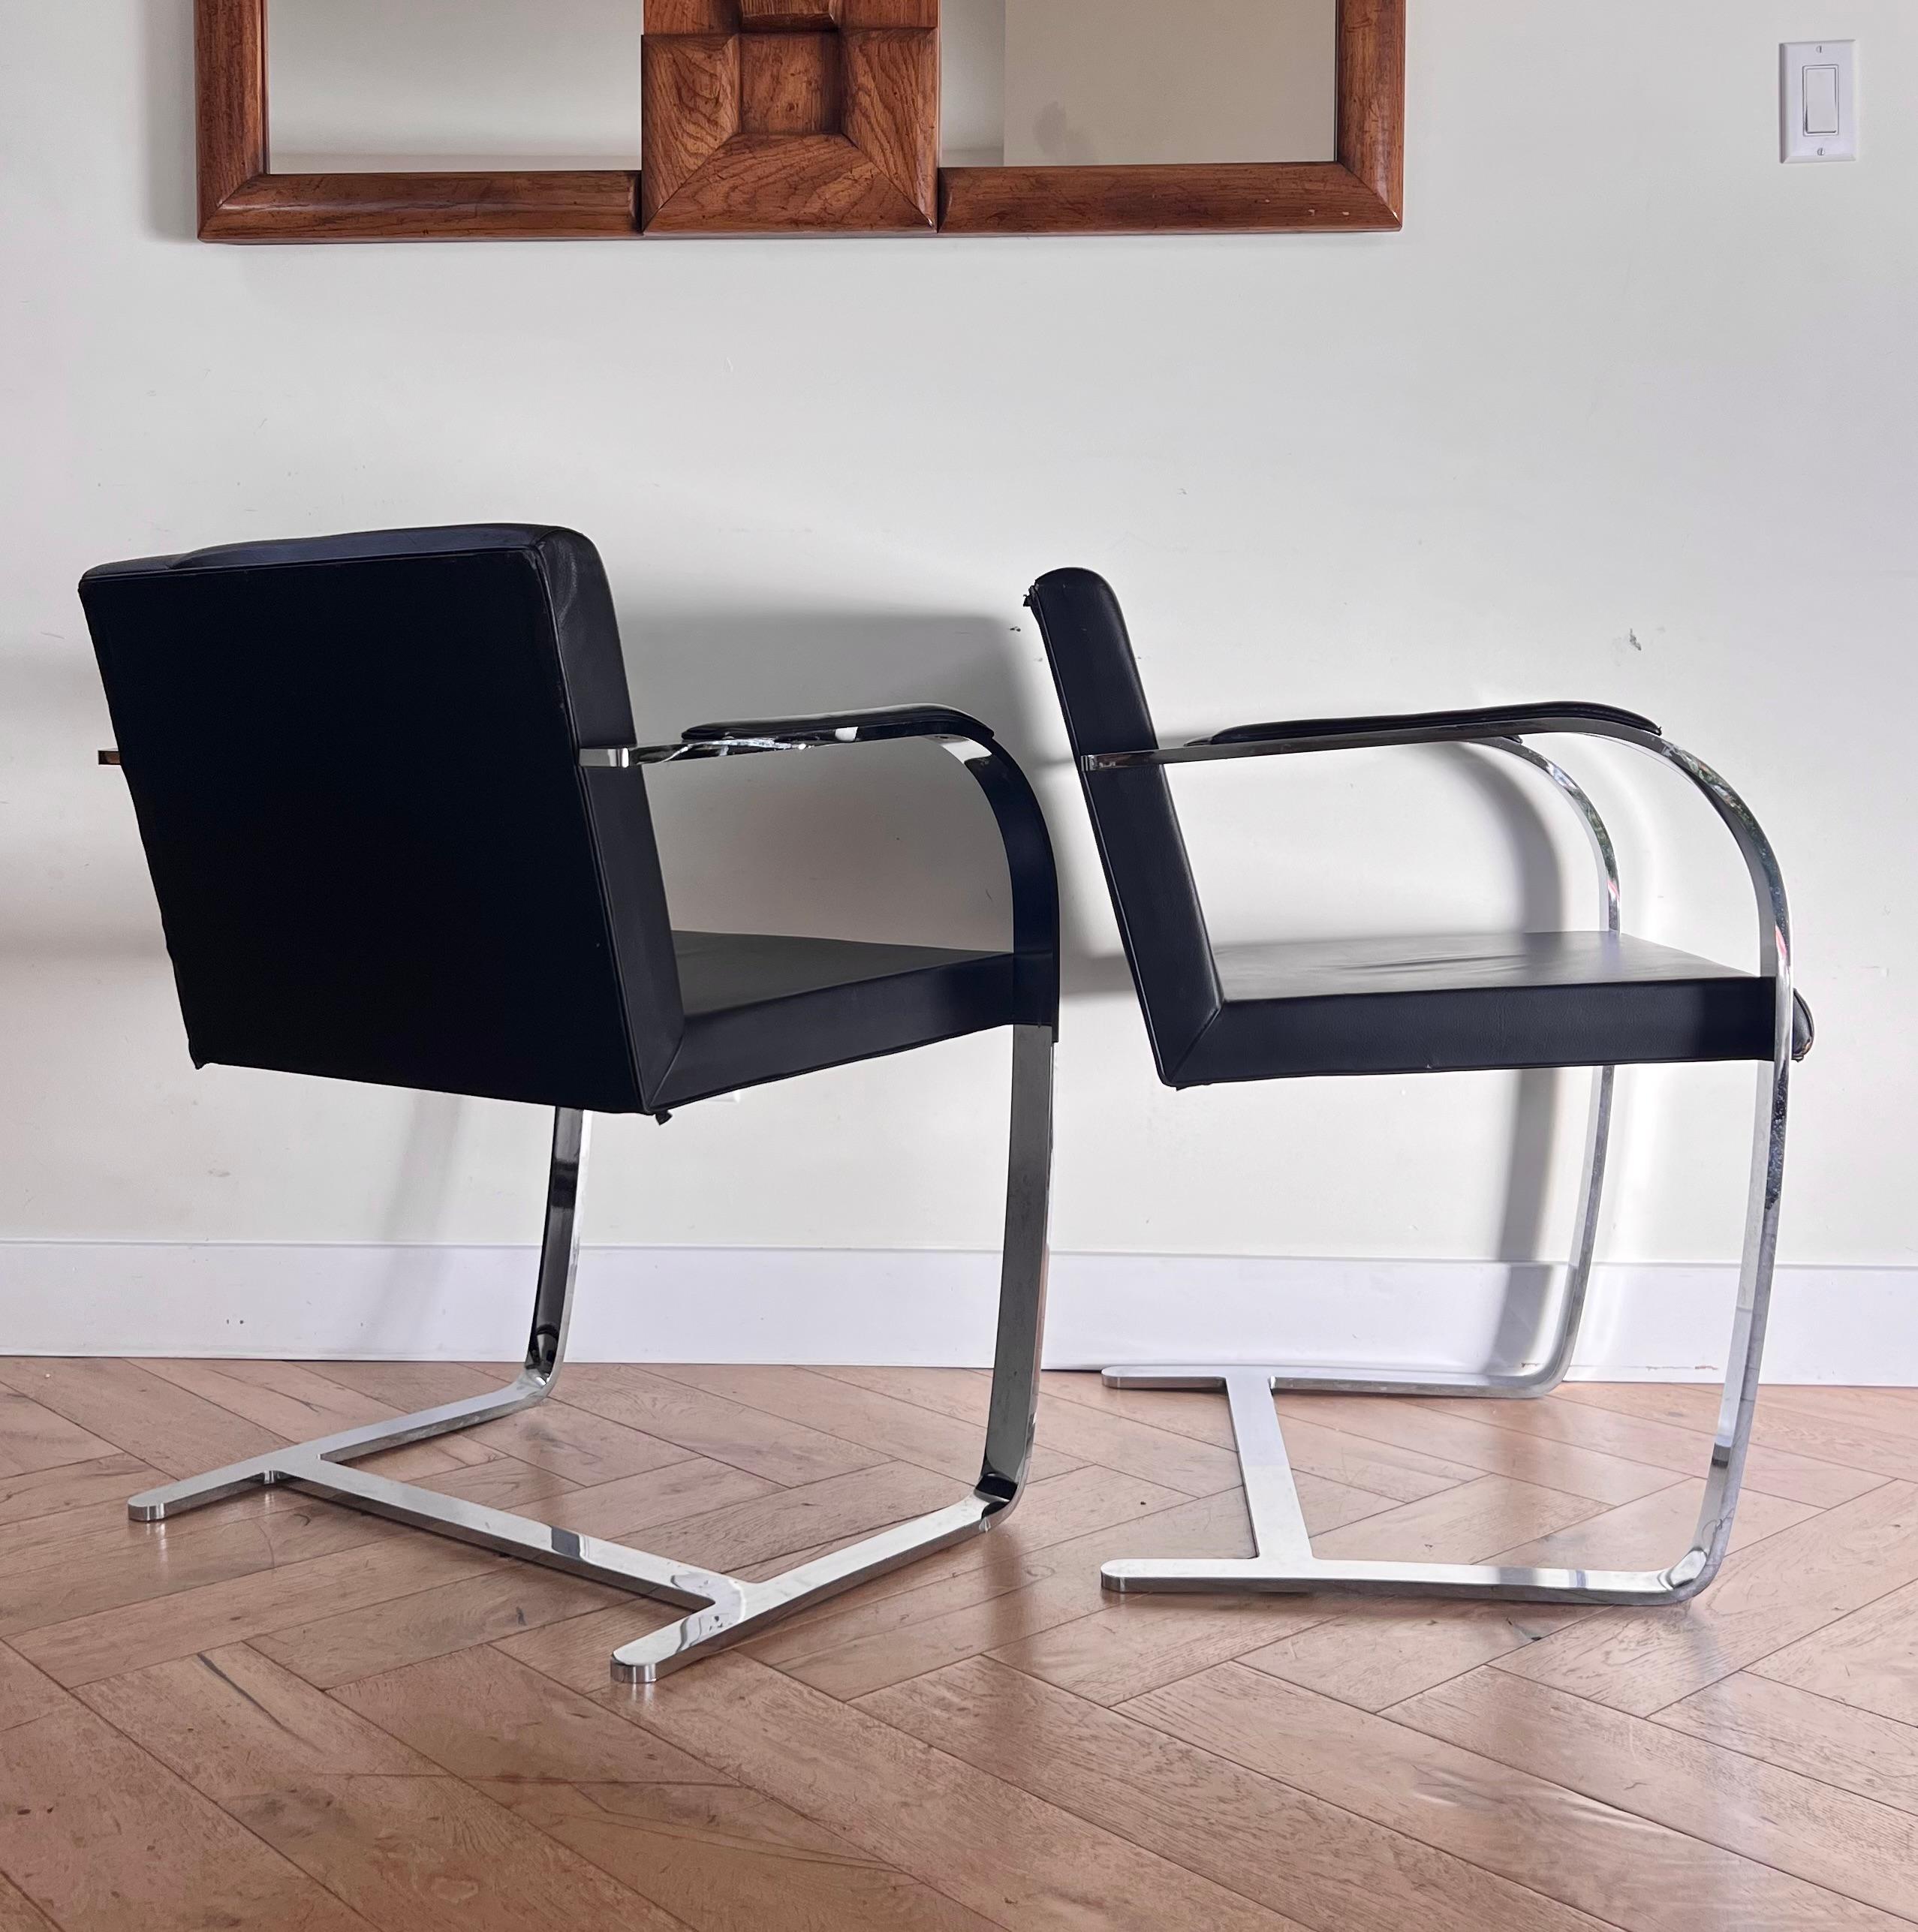 Pair of Mies van der Rohe Brno chairs by Palazzetti, 1970s For Sale 7